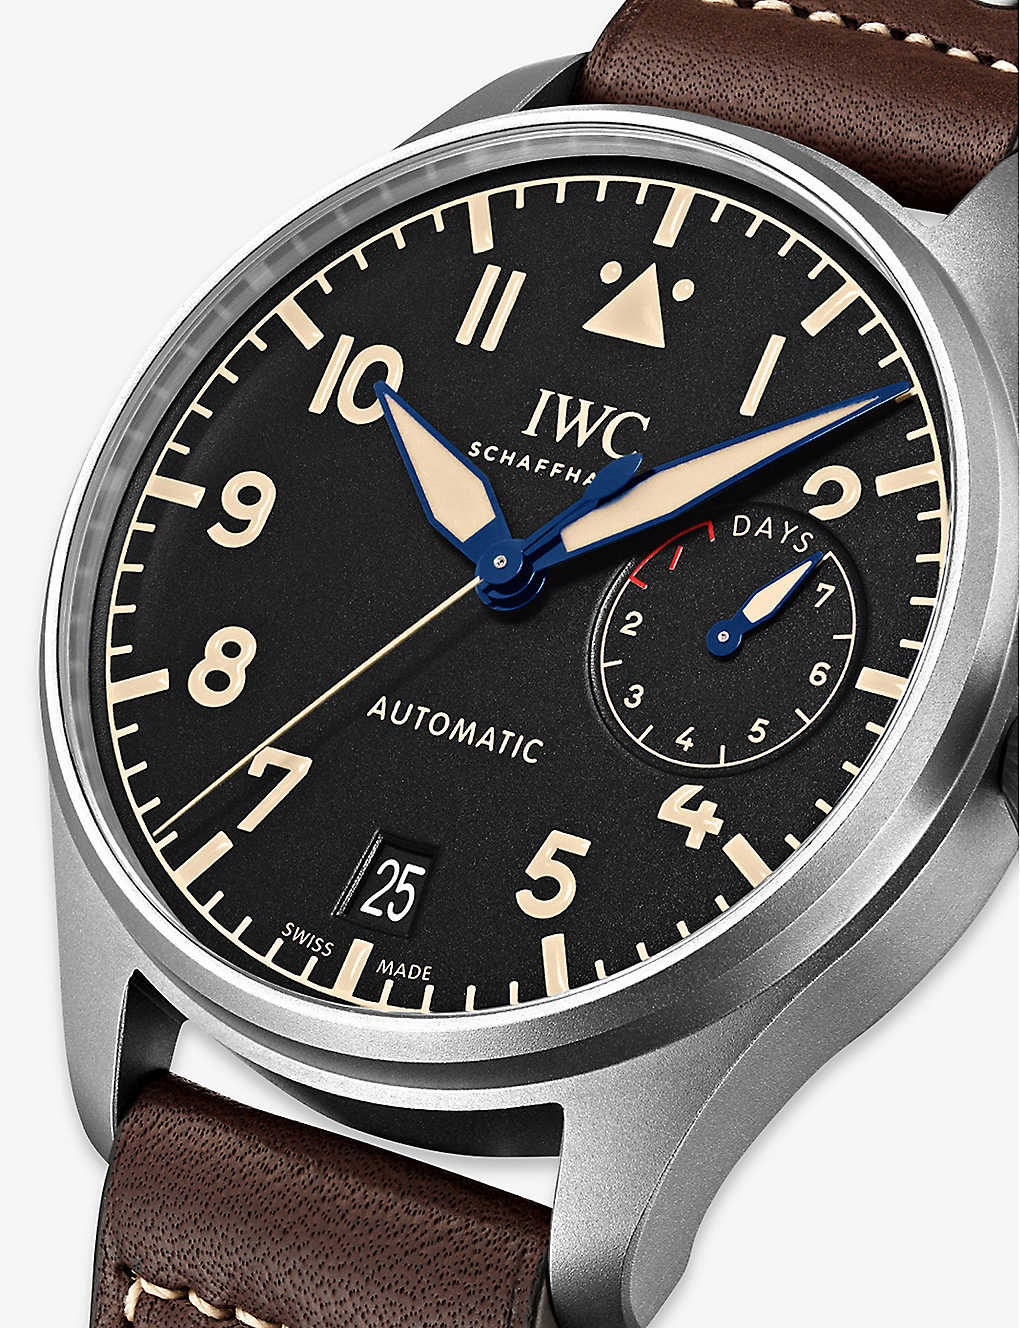 IW501004 Big Pilot's titanium and leather automatic watch - 4